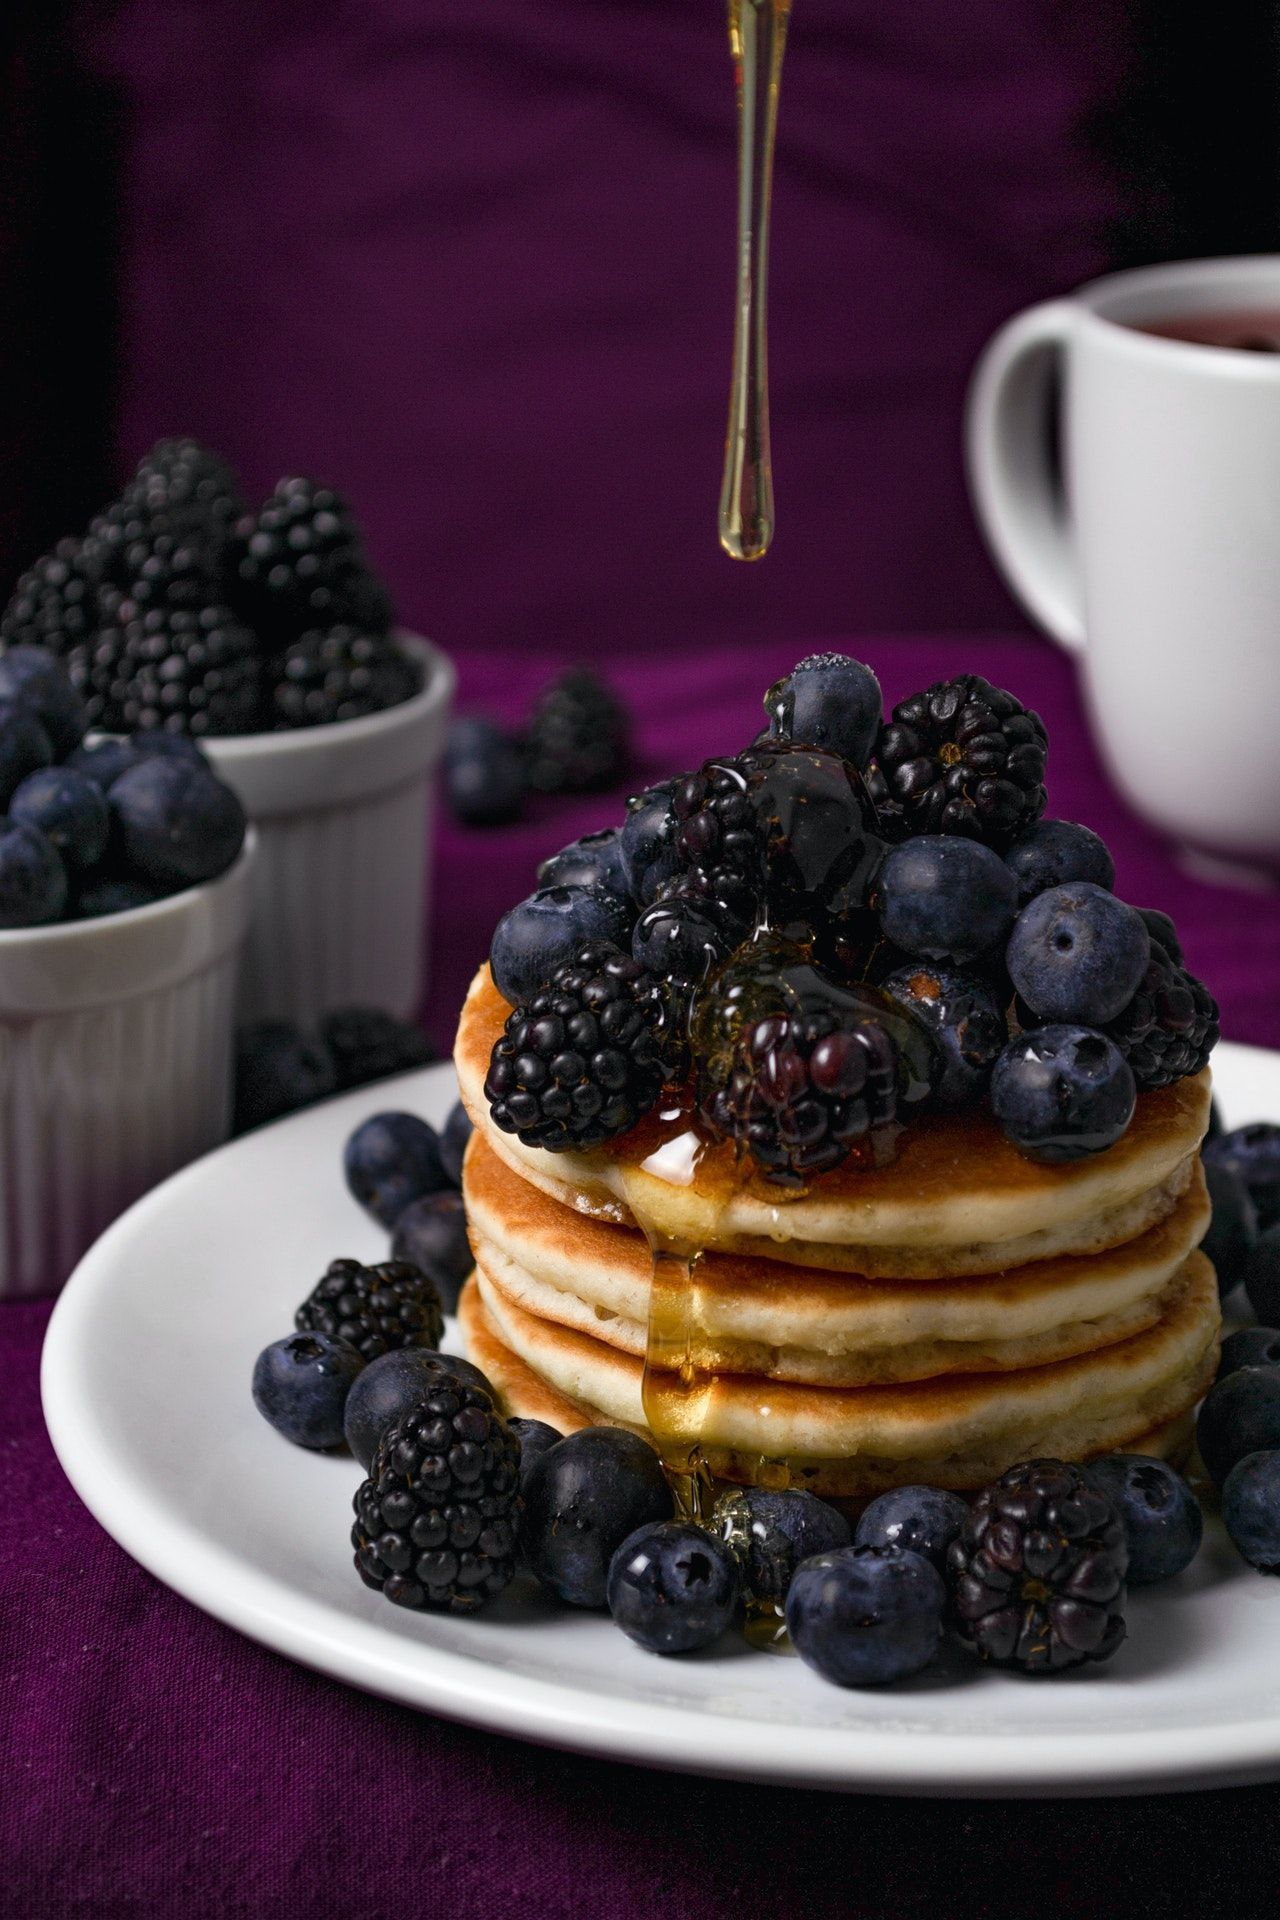 Stack of pancakes topped with blueberries and blackberries with syrup being poured on them with a purple background